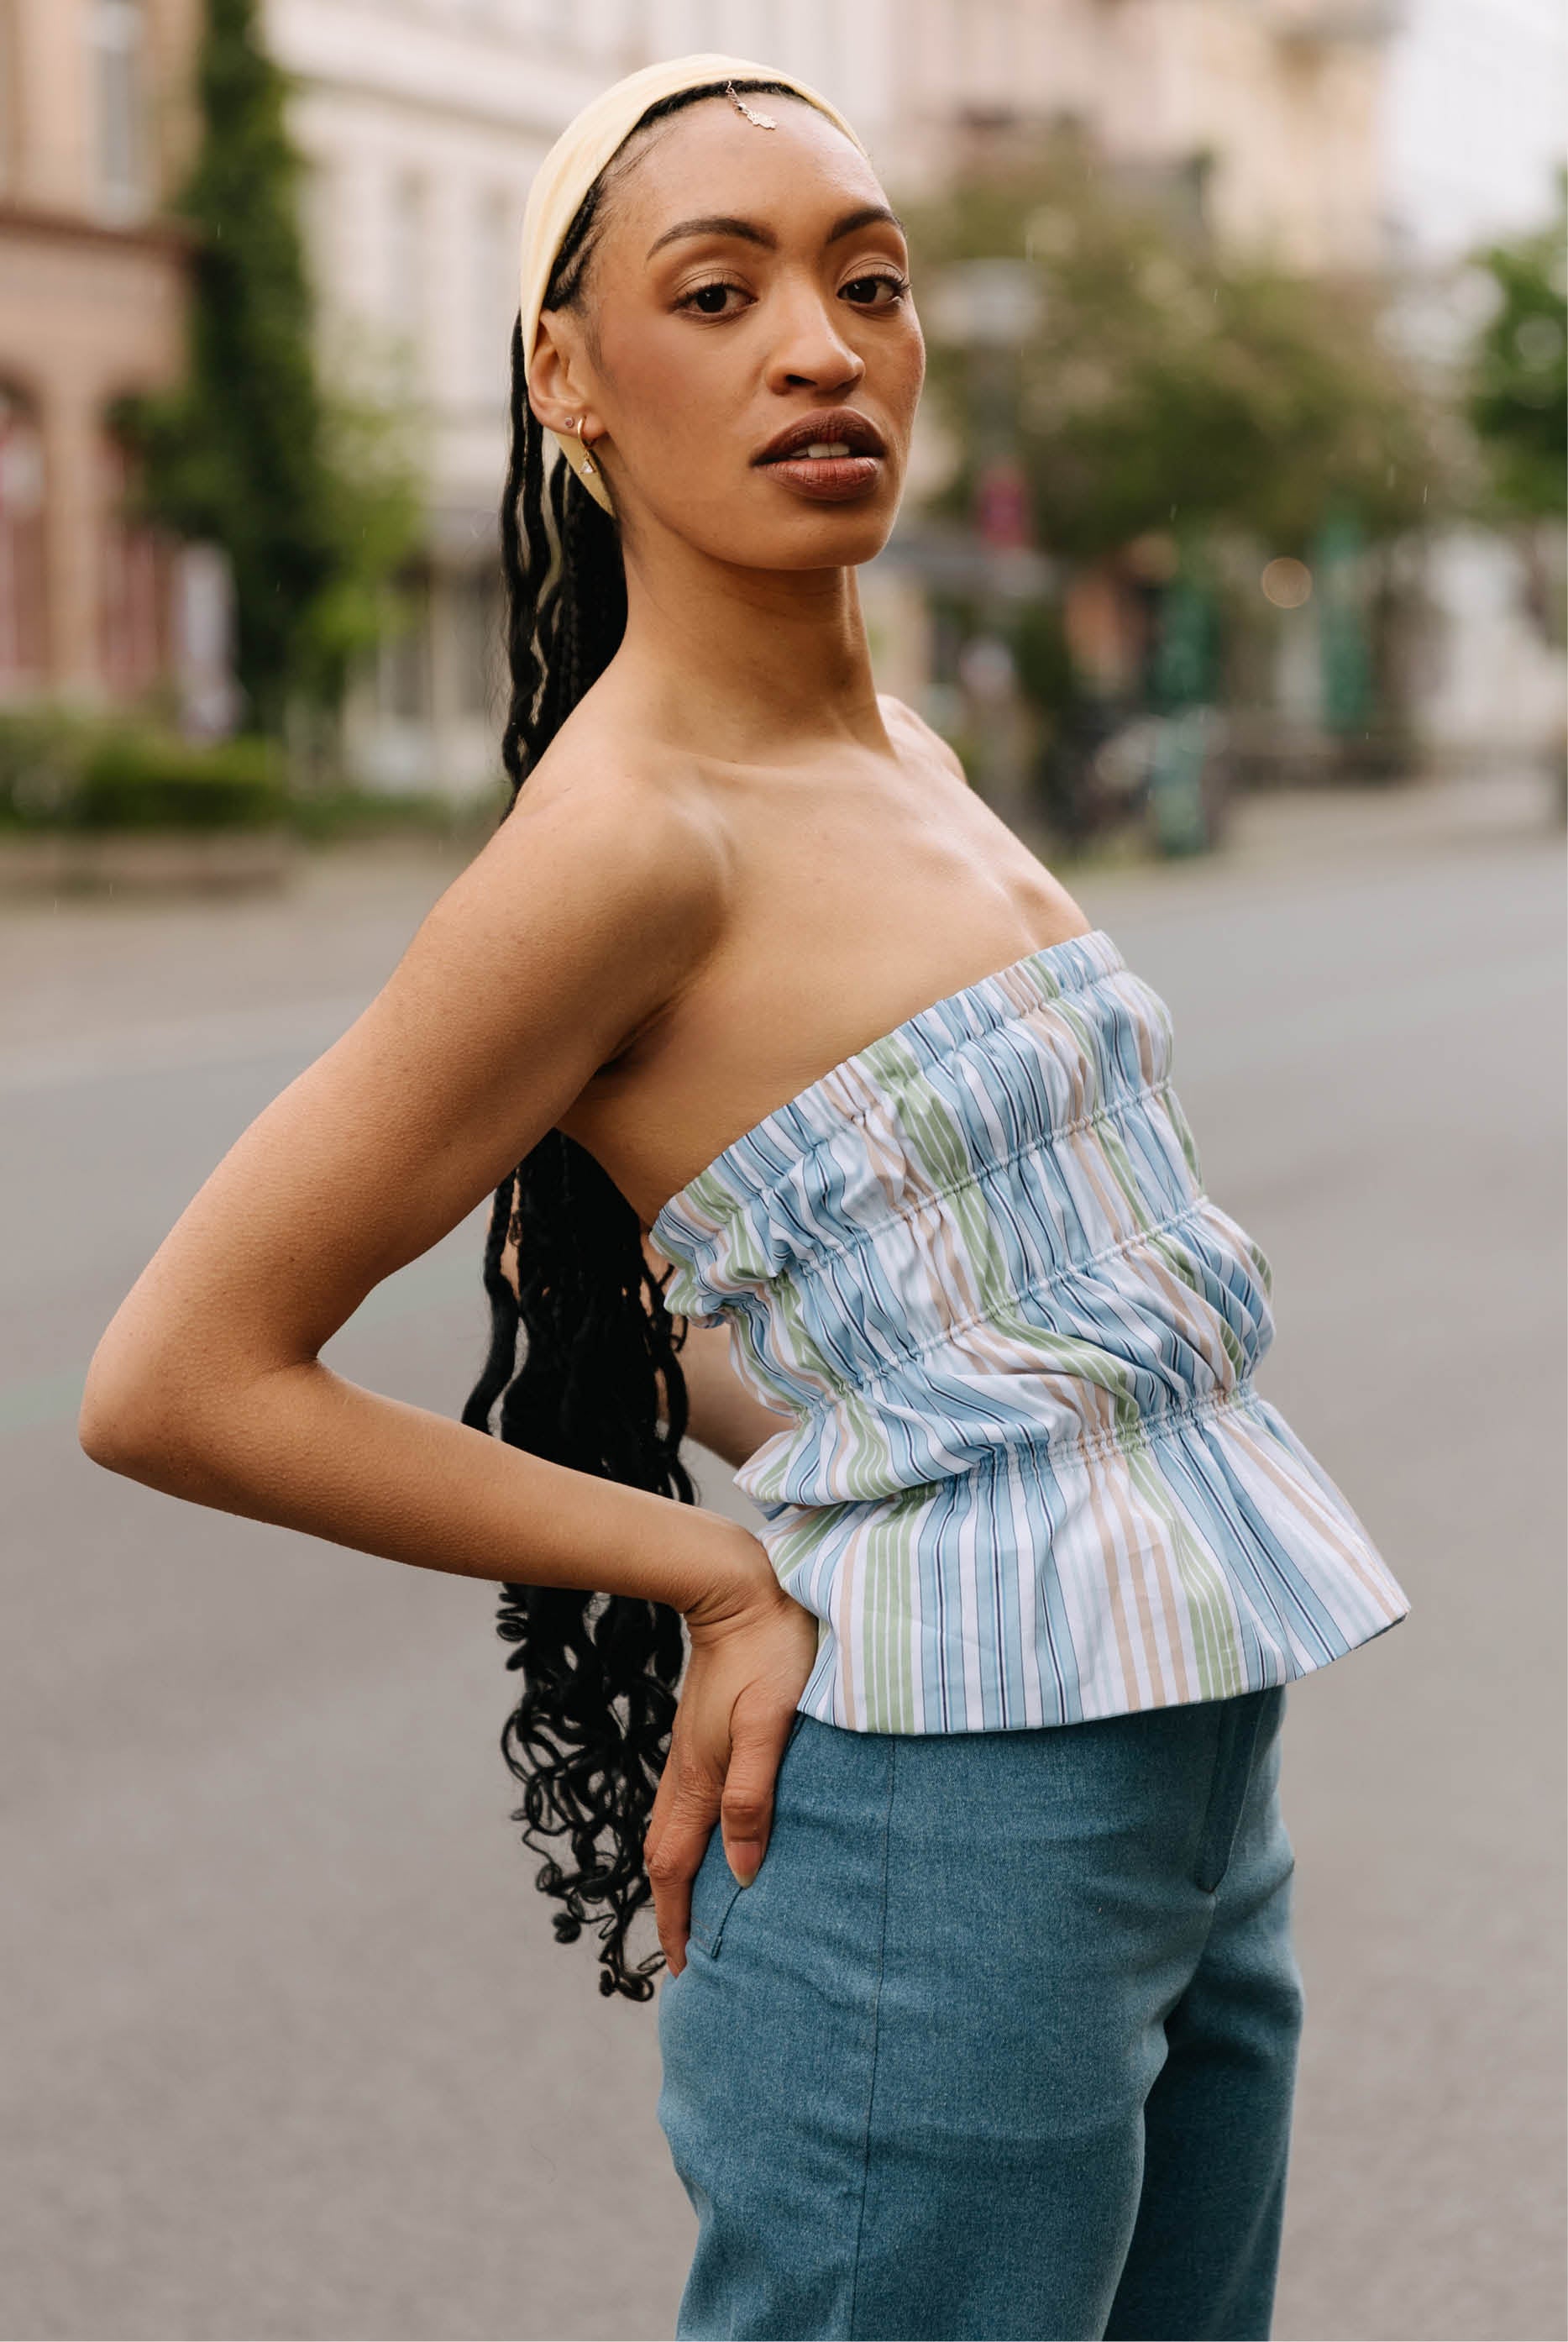 Woman wearing the Zola Top sewing pattern from JULIANA MARTEJEVS on The Fold Line. A reversible tube top pattern made in cotton poplin fabric, featuring gathers and a peplum.